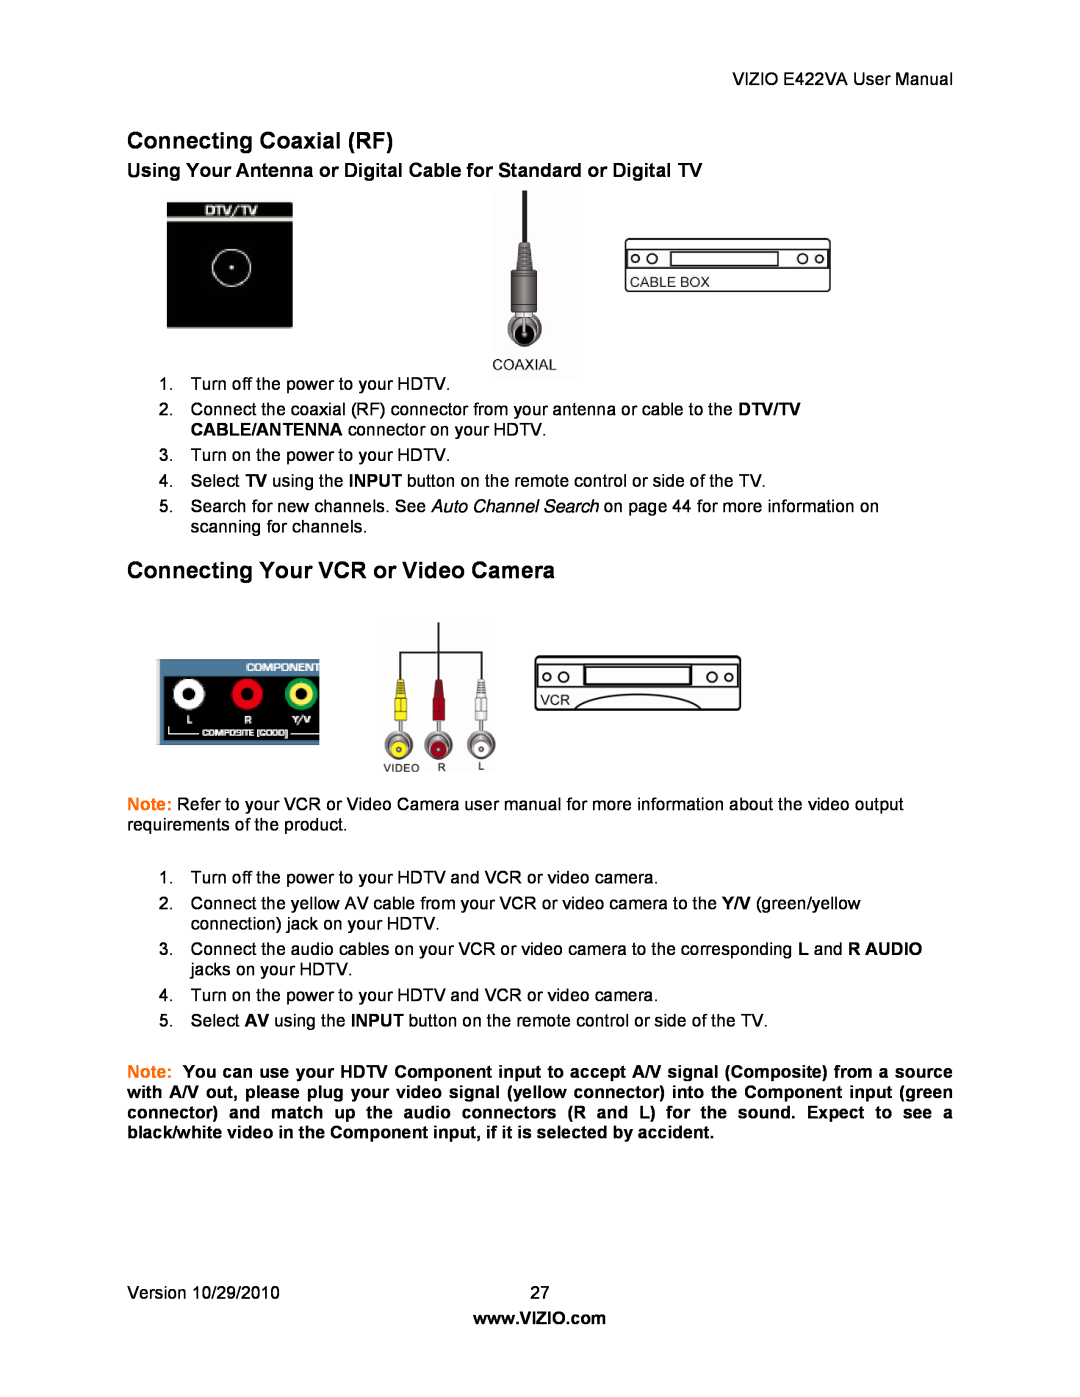 Xerox E422VA user manual Connecting Coaxial RF, Connecting Your VCR or Video Camera 